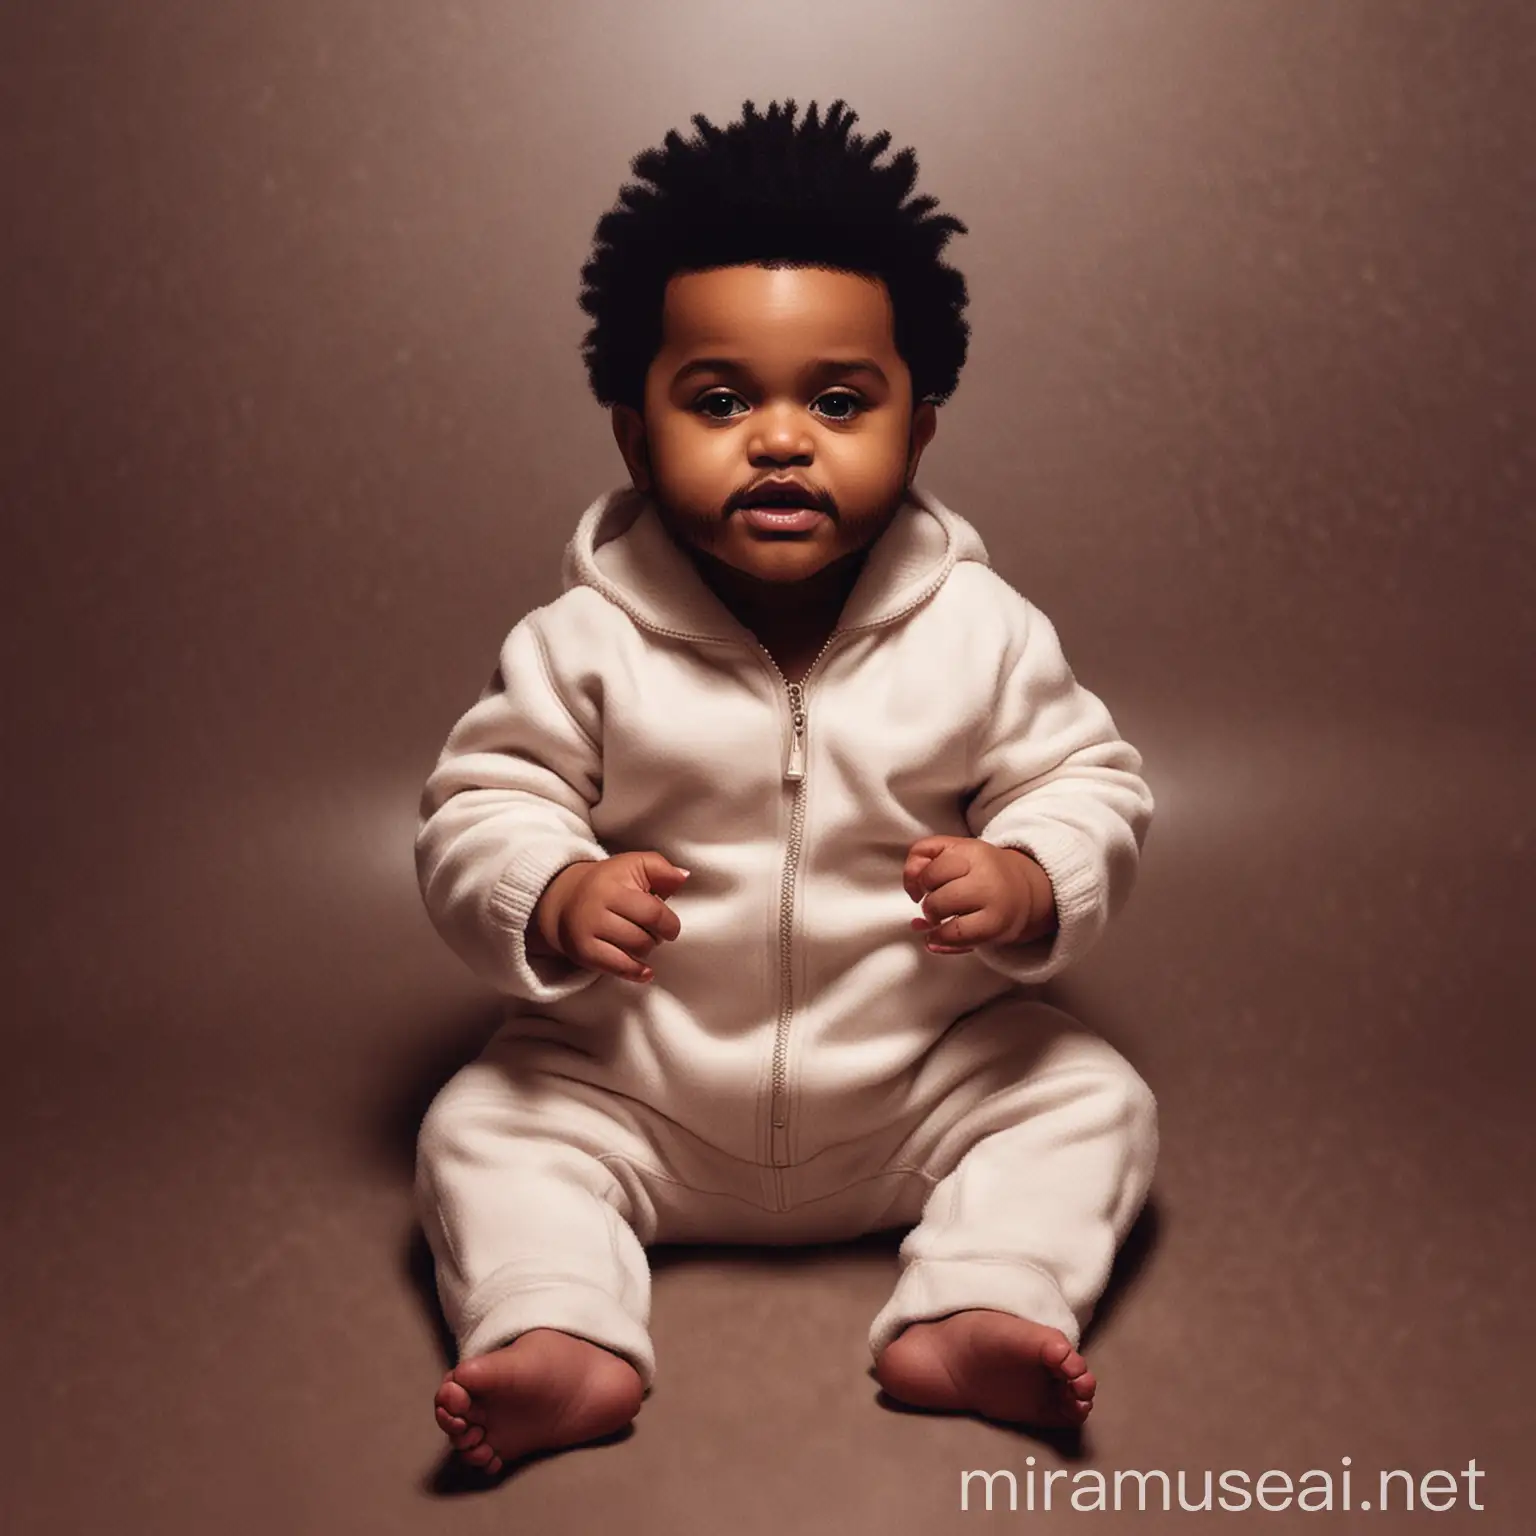 the weeknd as a baby as the after hours album cover